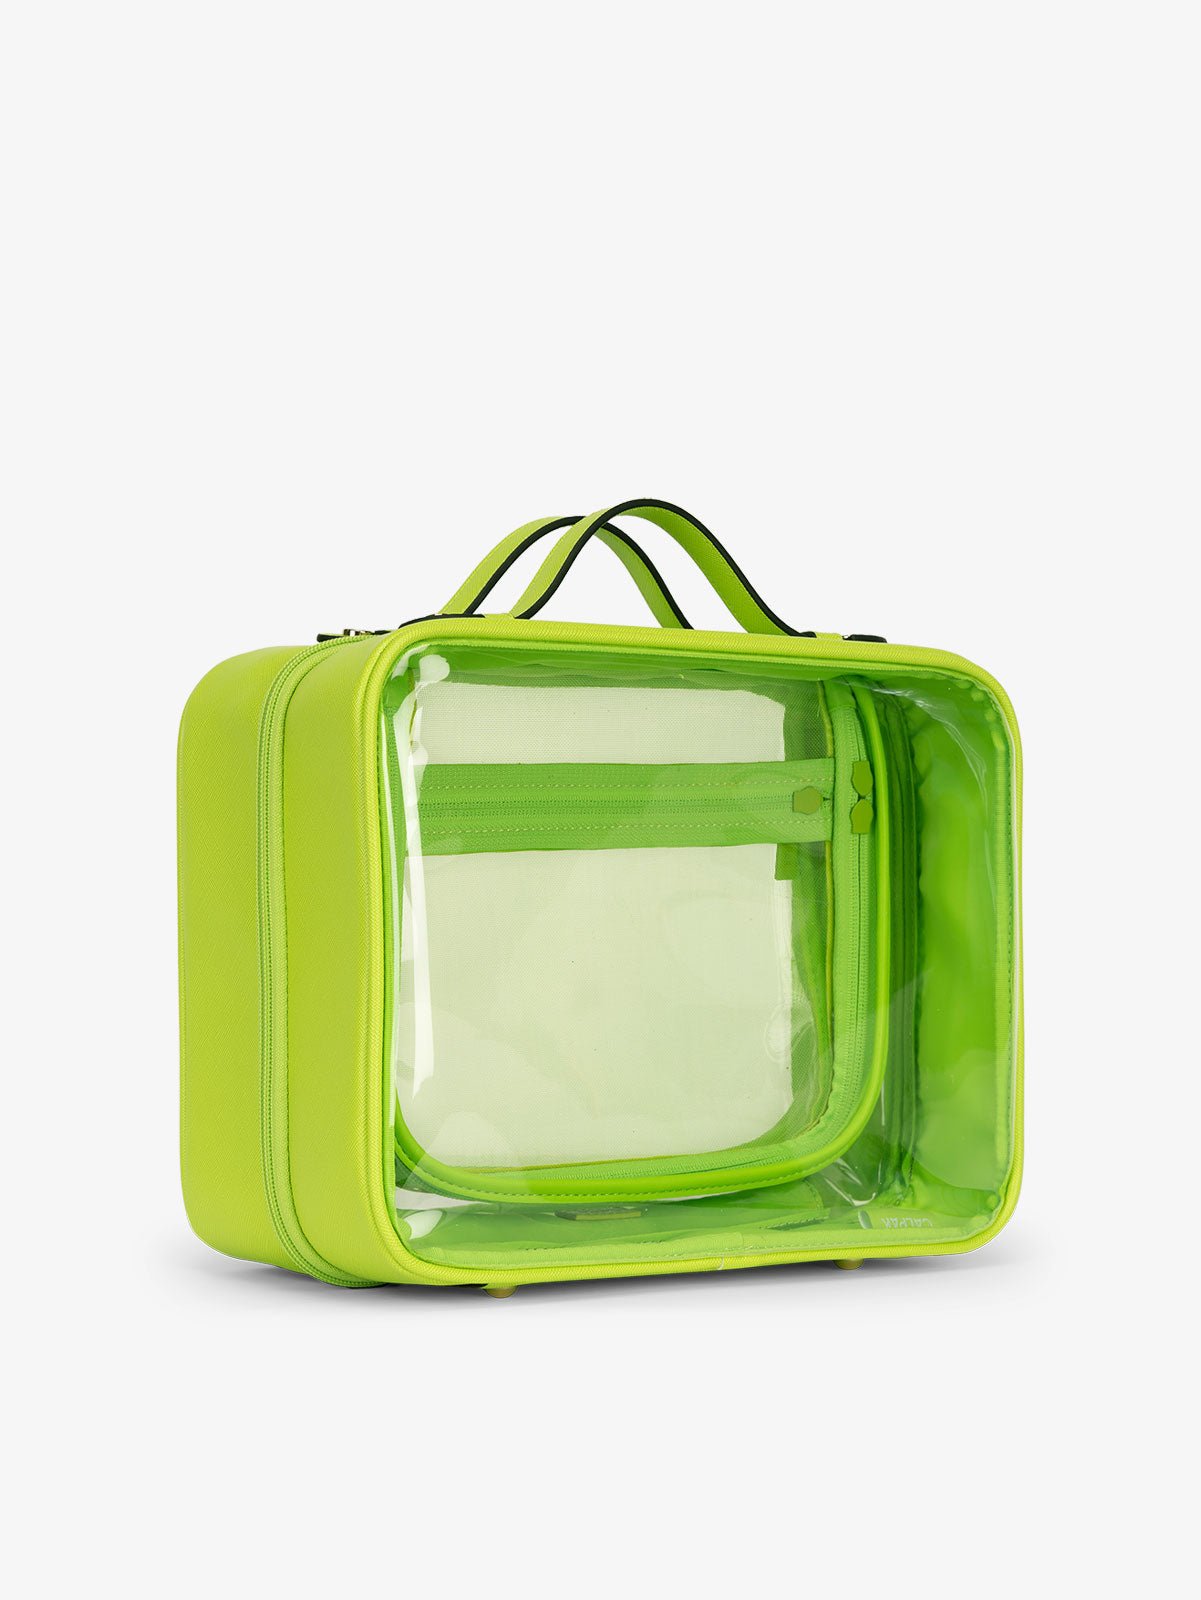 CALPAK large clear skincare bag with multiple zippered compartments in lime green